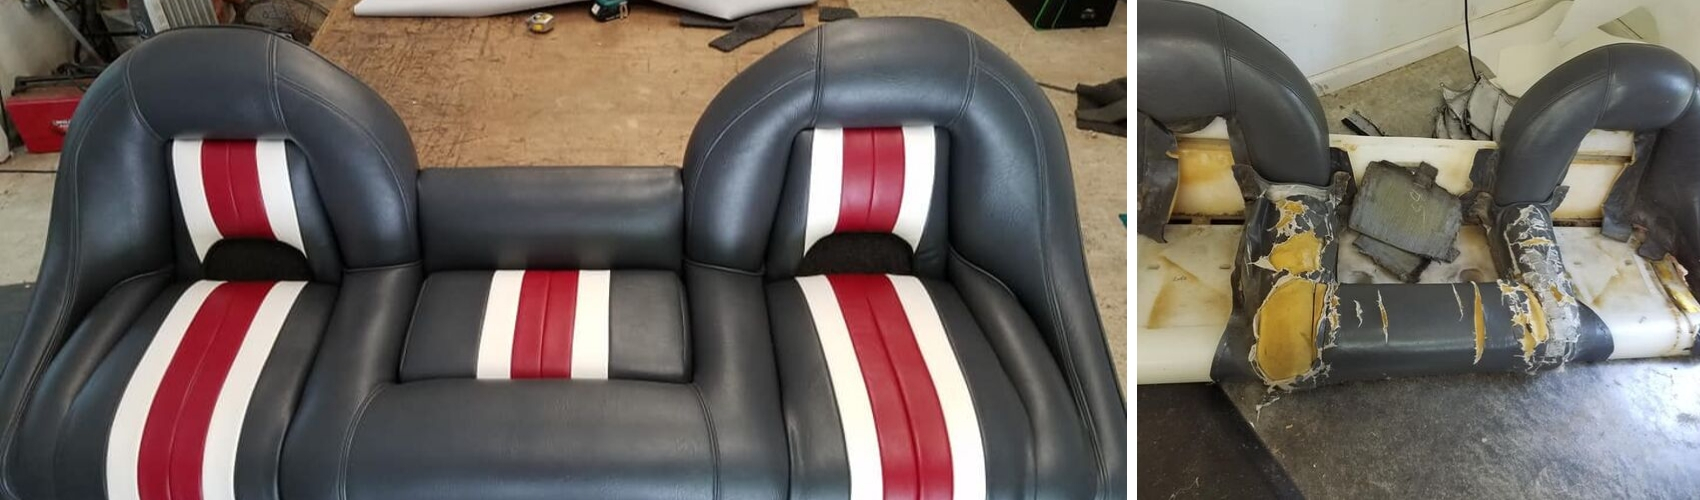 Boating Seats Before and After Upholstery 